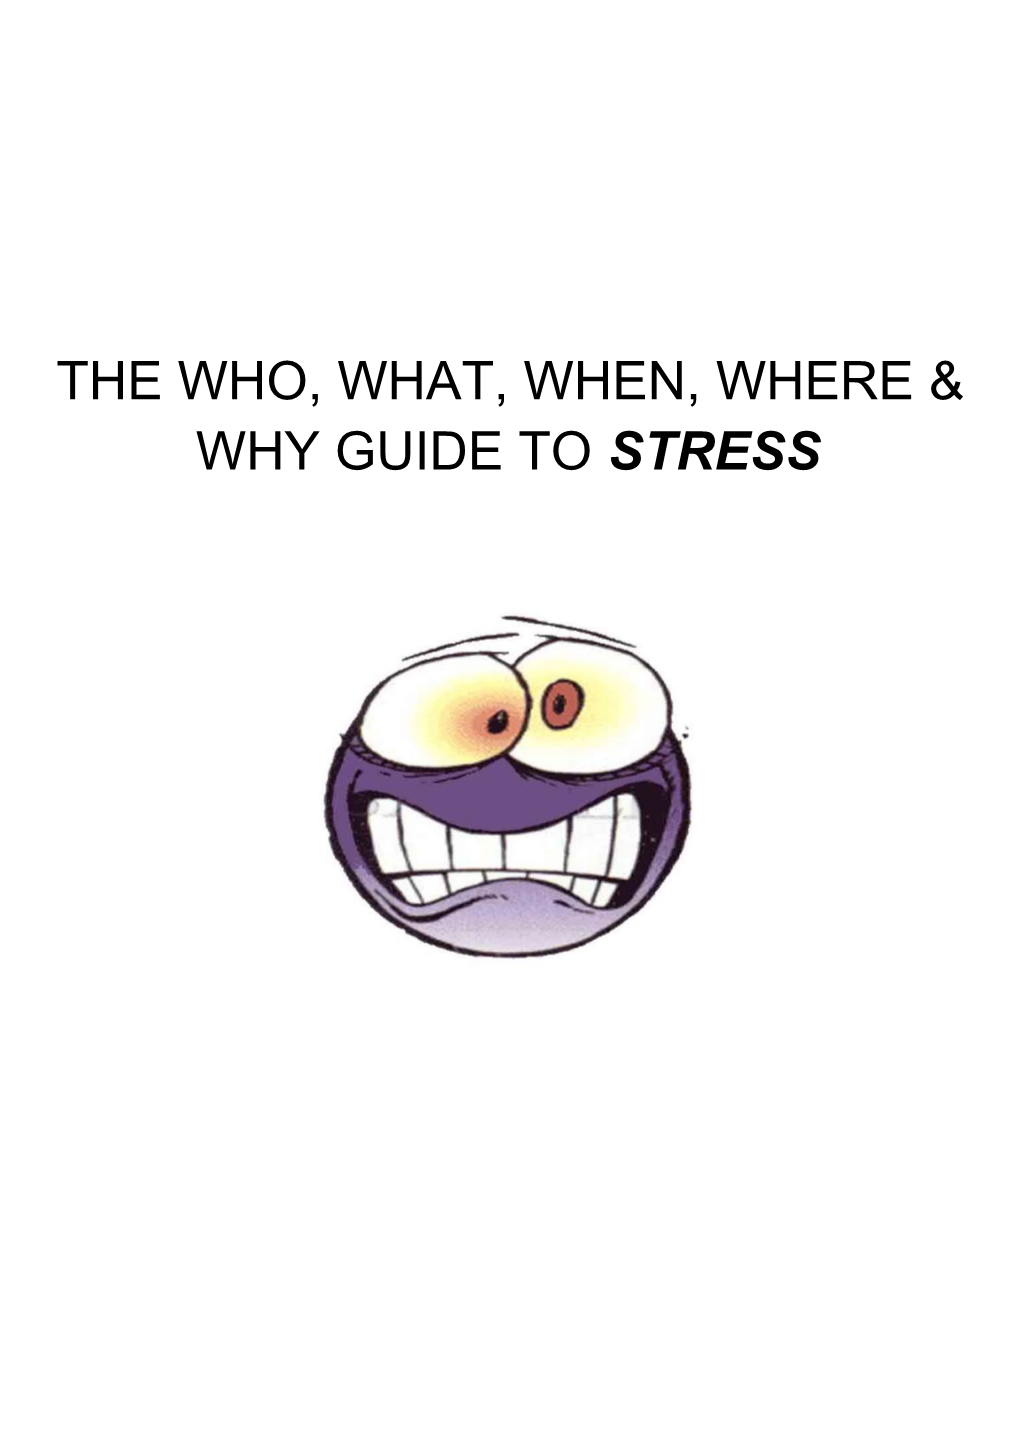 The Who, What, When, Where & Why Guide to Stress